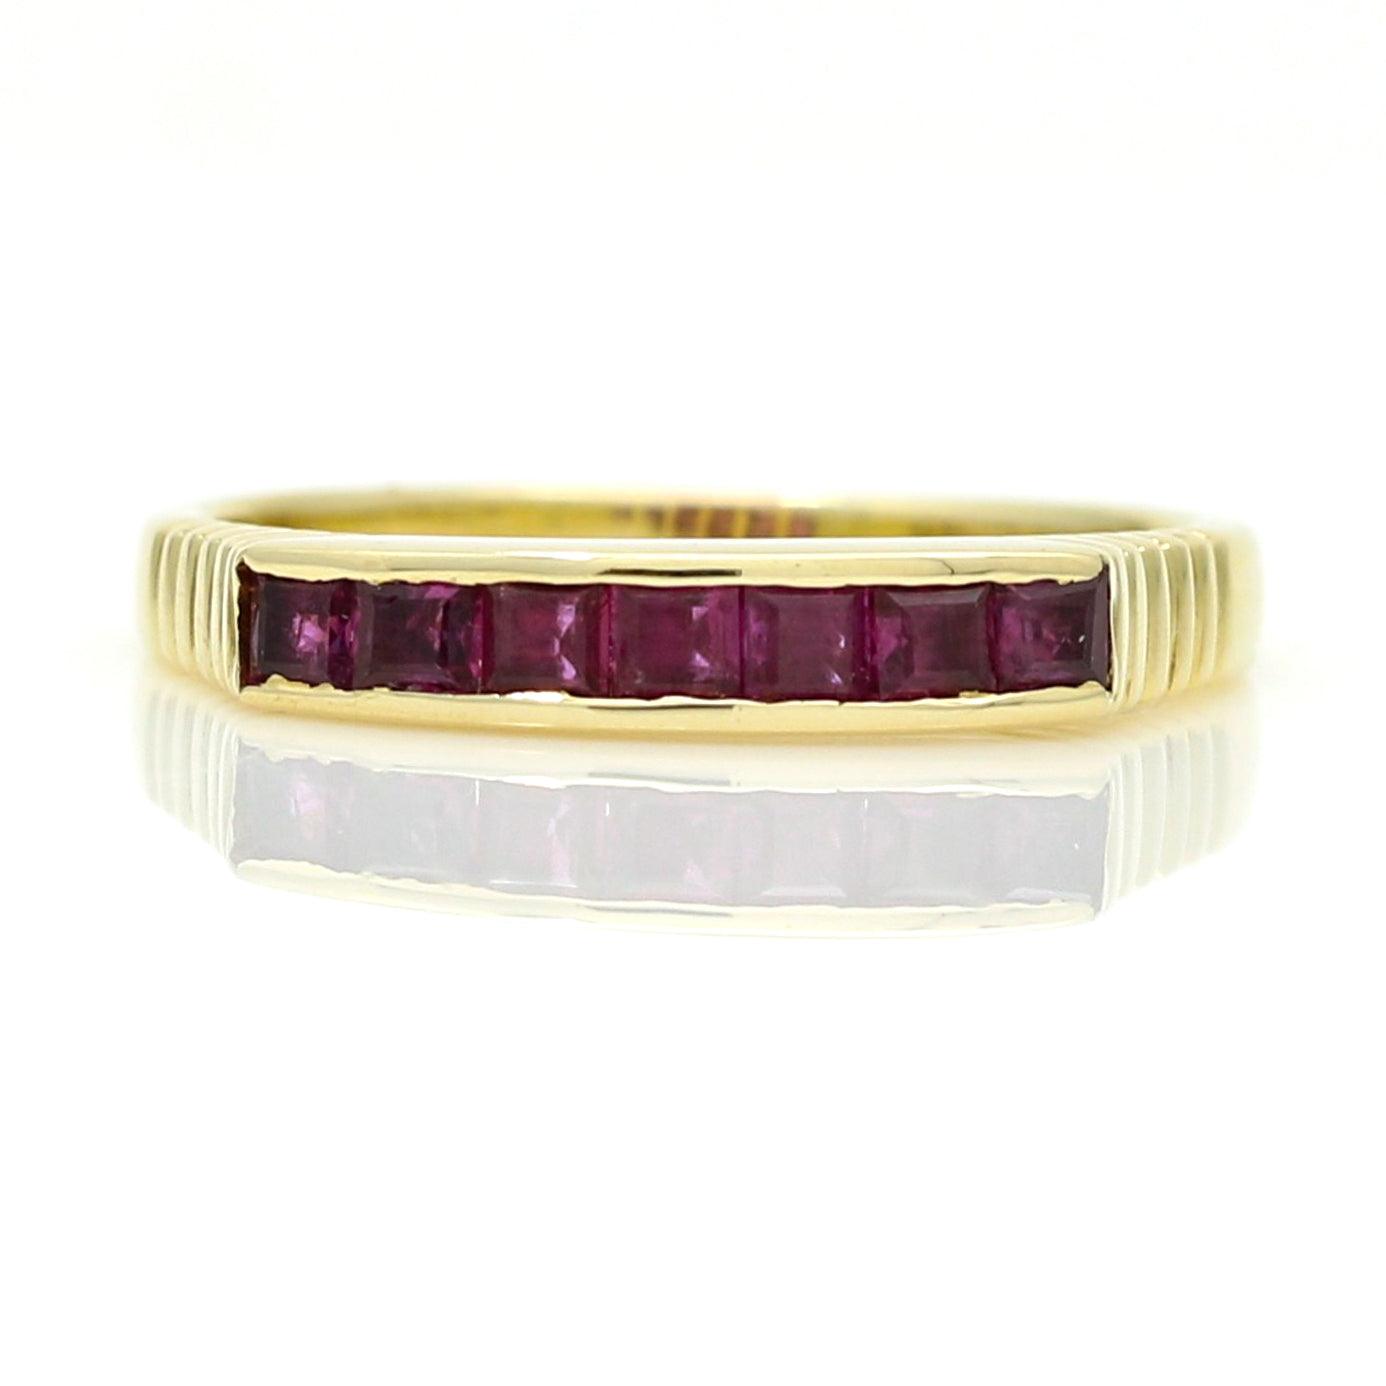 Women's Channel-Set Ruby Band Ring in 14k Yellow Gold - 31 Jewels Inc.